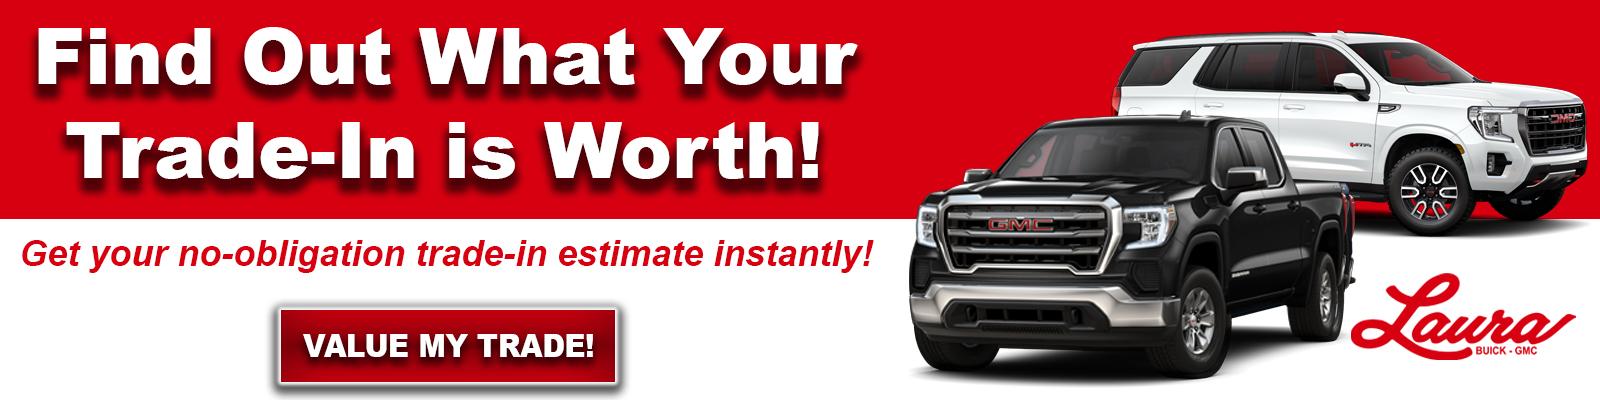 Click here to value your trade and get an instant offer!